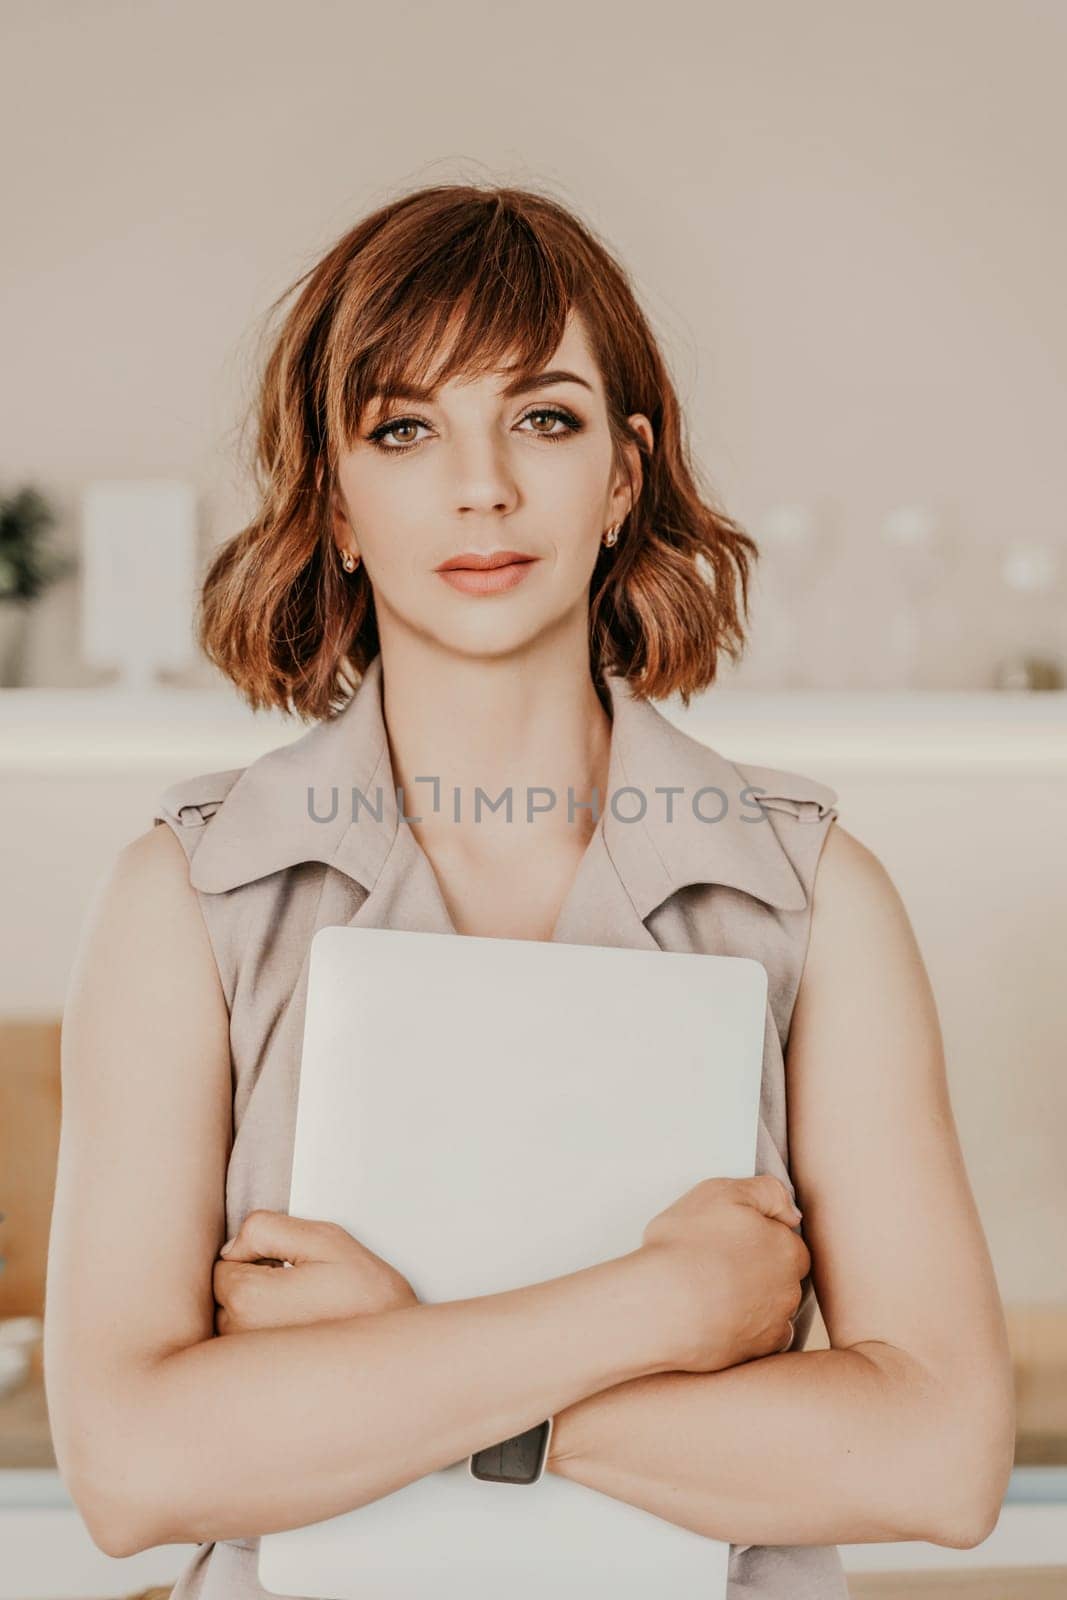 Brunette macbook. Portrait of a woman, she holds a mabuk in her hands and looks at the camera, wearing a beige dress on a beige background